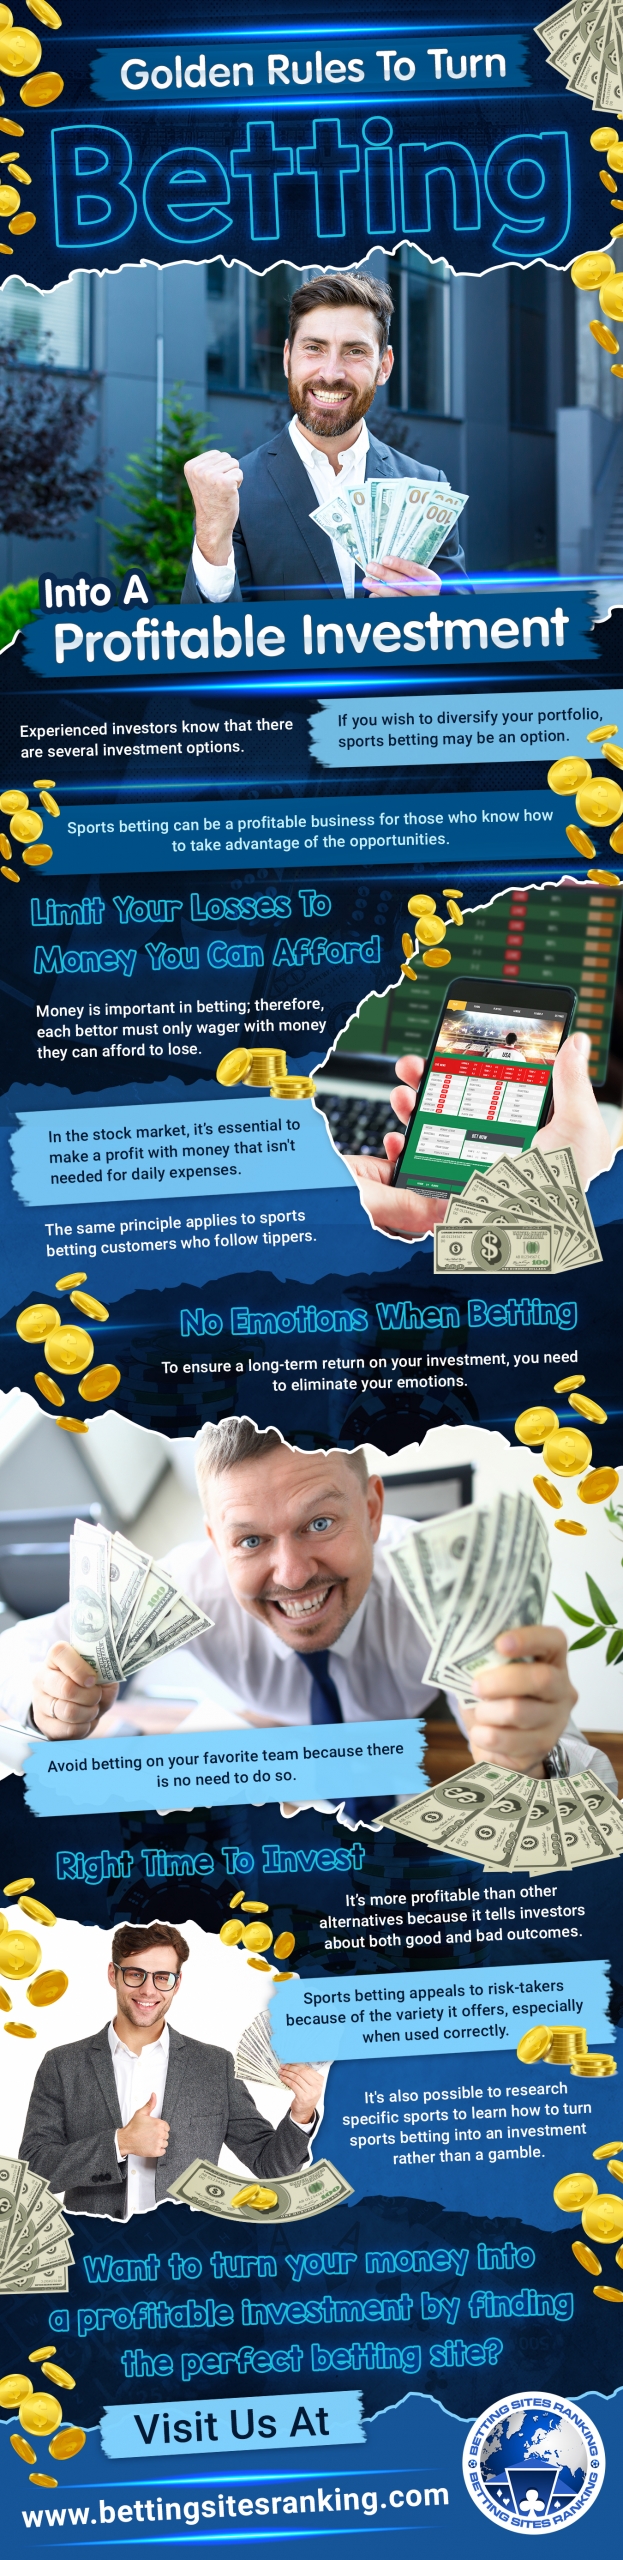 Golden-Rules-To-Turn-Betting-Into-A-Profitable-Investment